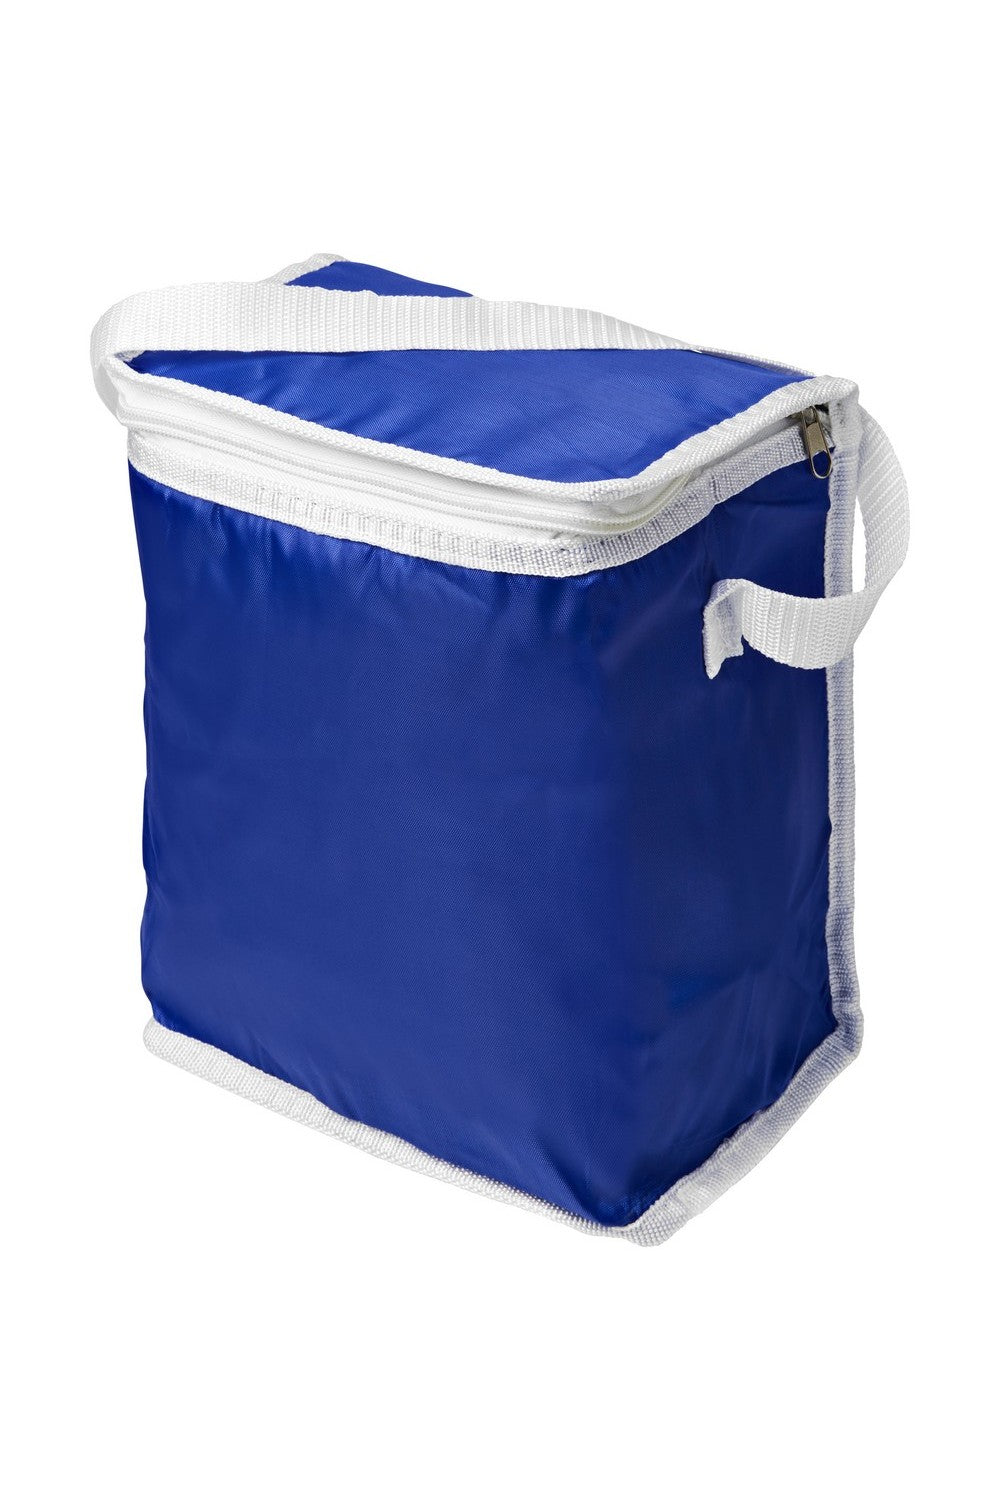 Bullet Tower Lunch Cooler Bag (Blue) (One Size)